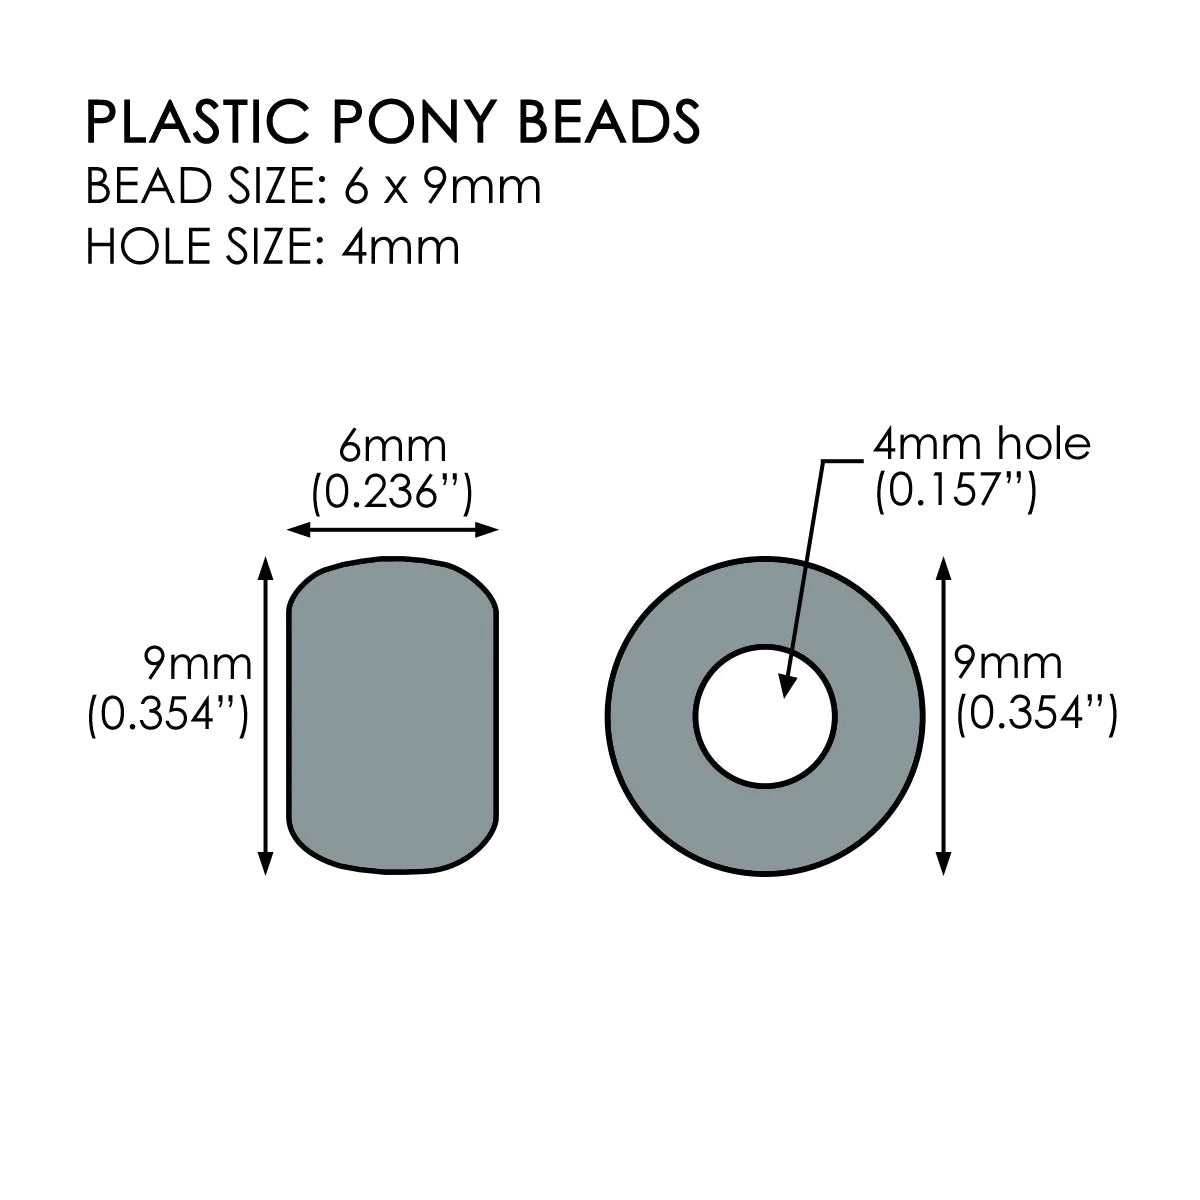 Matte Rainbow 6 x 9mm Pony Bead Variety Pack - 12 Colors (6000 beads total)